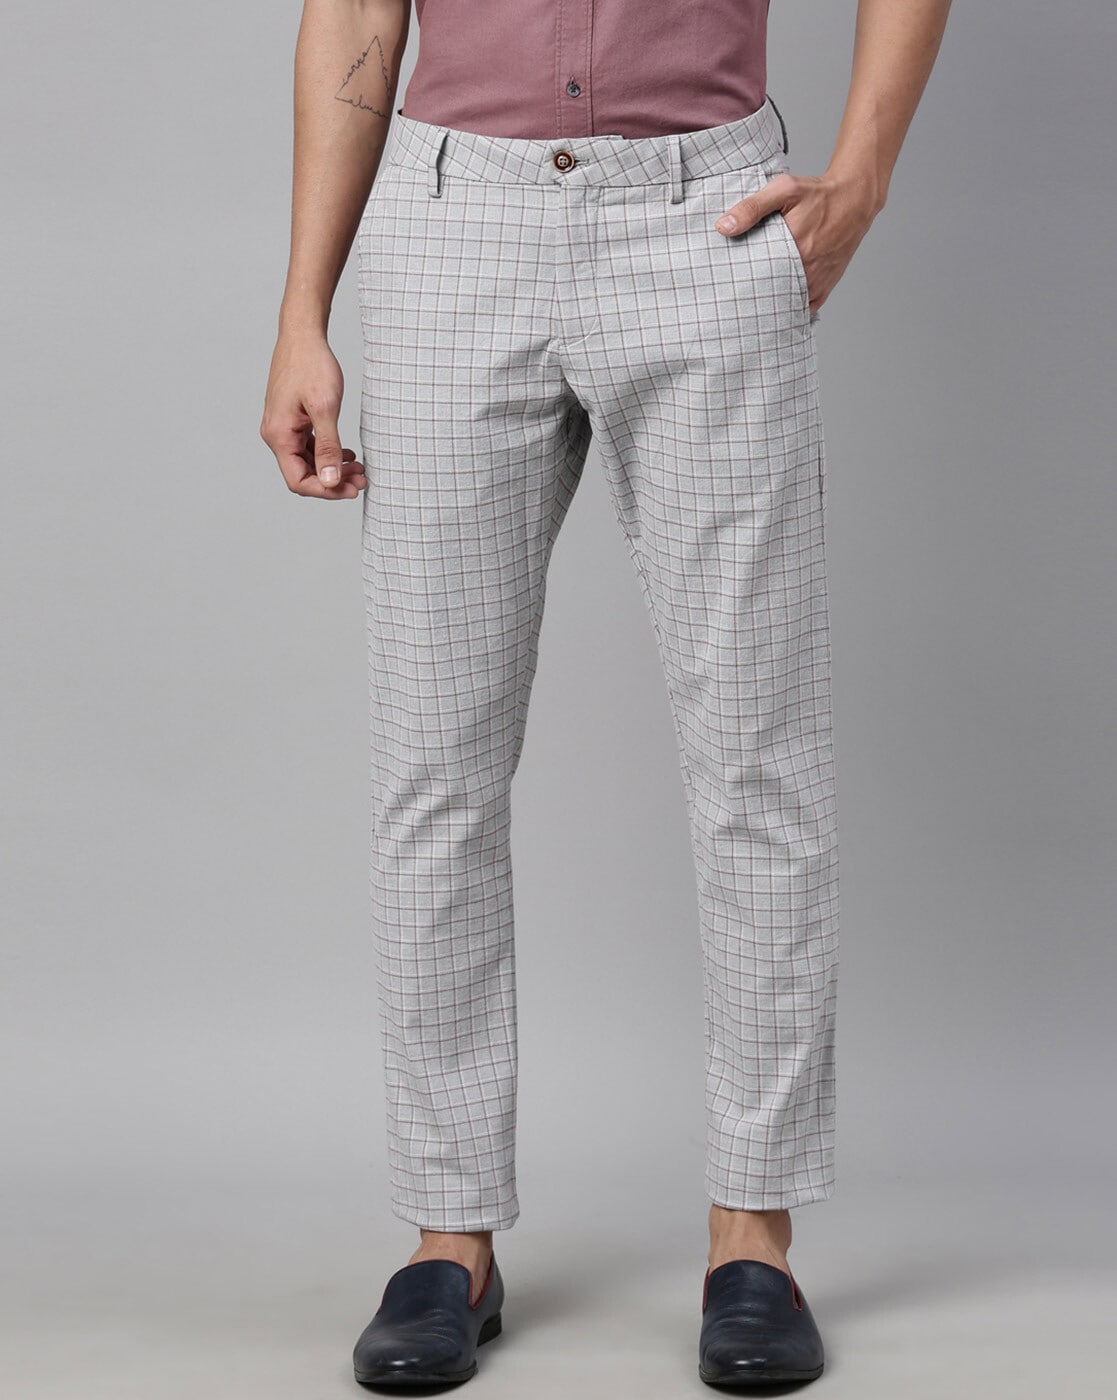 Ladies Dogtooth Print Trousers Tie Waist Check Paper Bag Style Cigarette  Pant | eBay